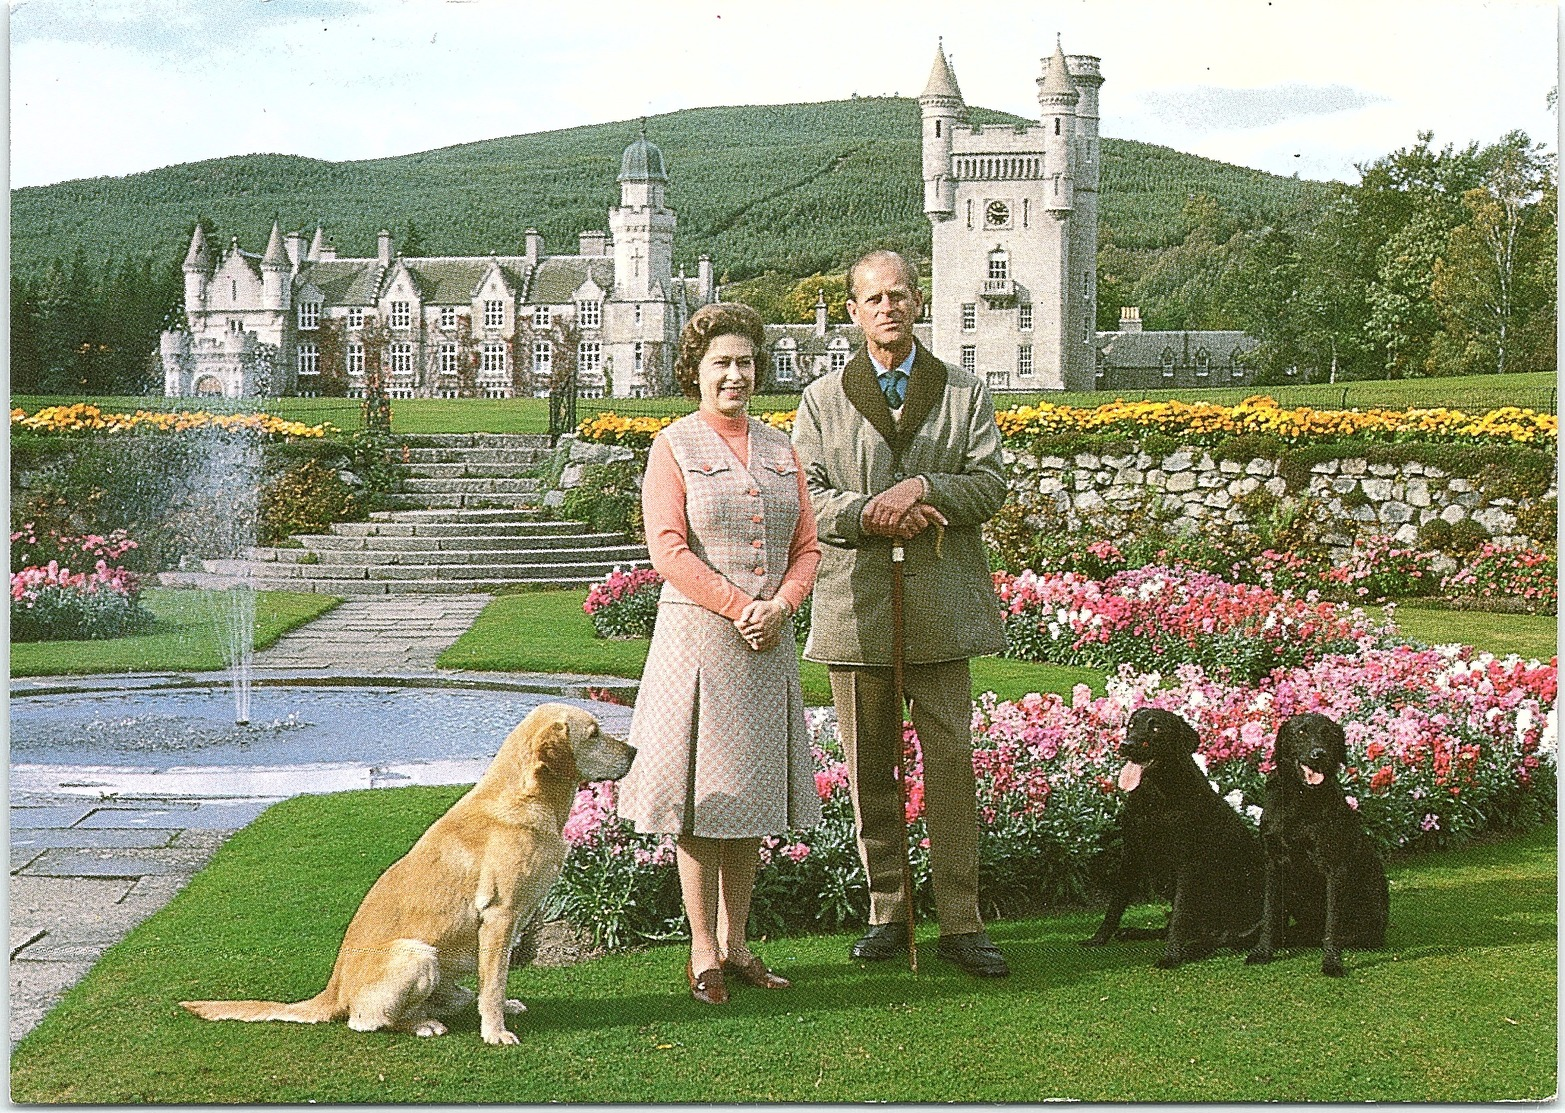 H.M. The Queen And H.R.H. The Duke Of Edinburgh In The Gardens Of Balmoral Castle - Royal Families